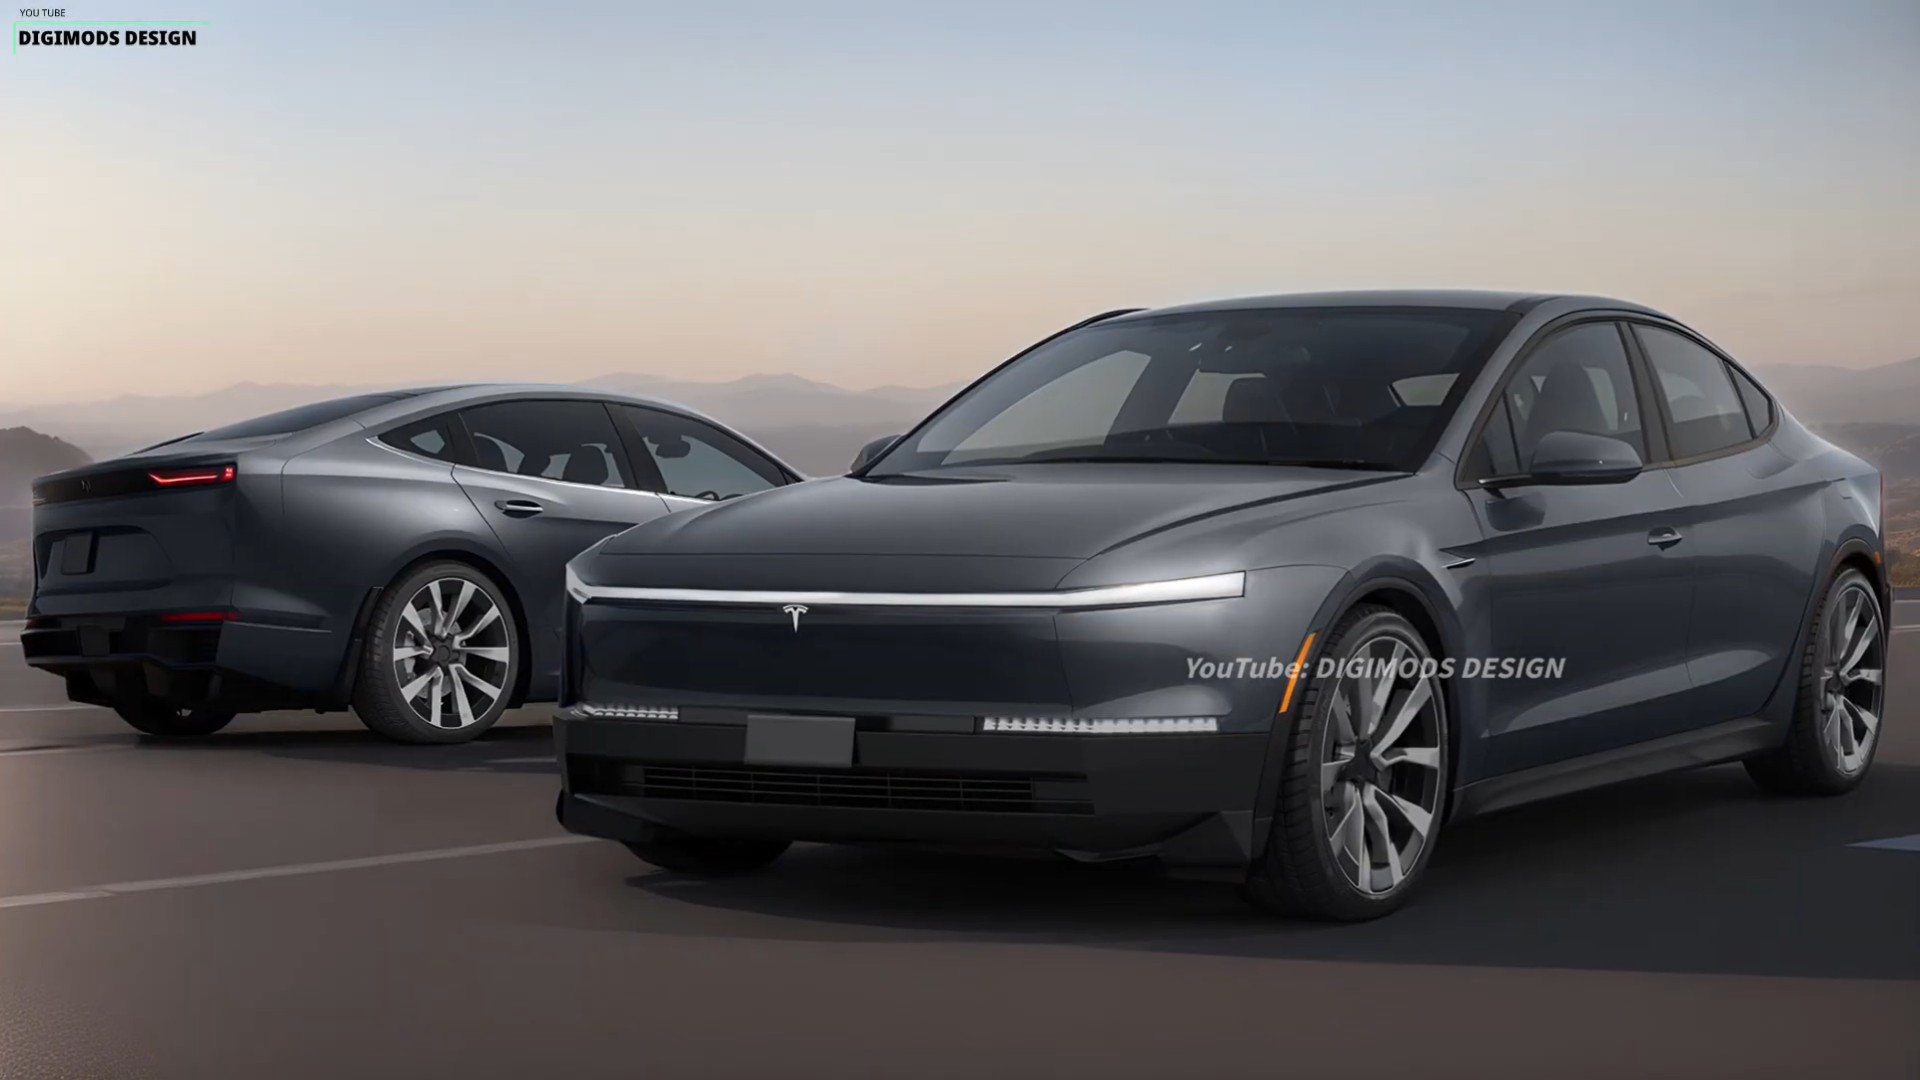 Model 2 May Become Tesla's Cheapest EV but Doesn't Look the Part